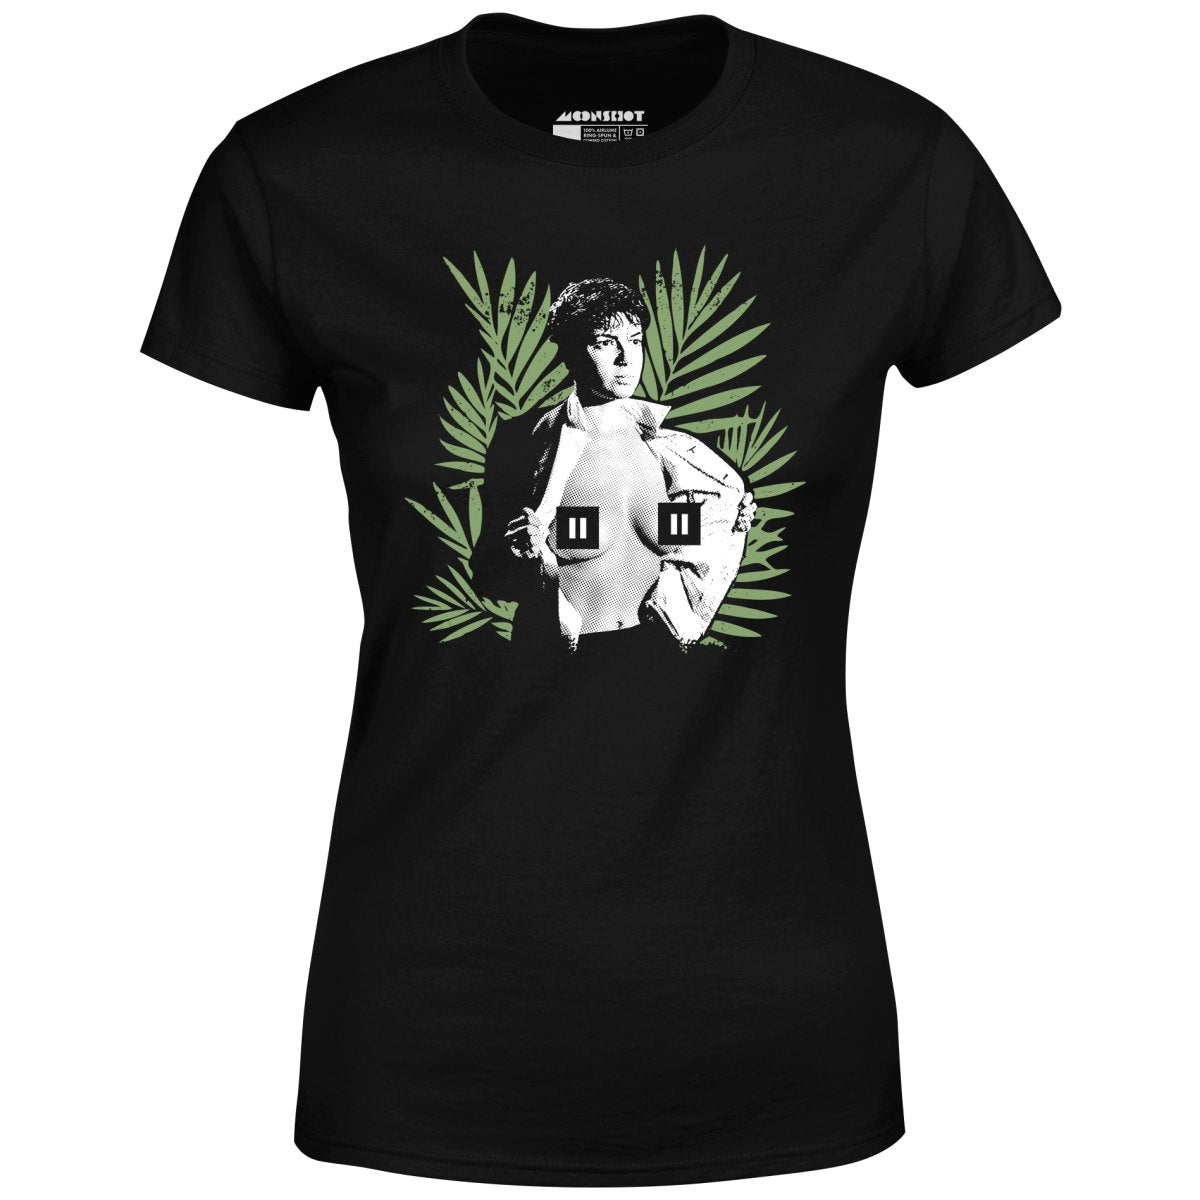 Just One of the Guys - Women's T-Shirt